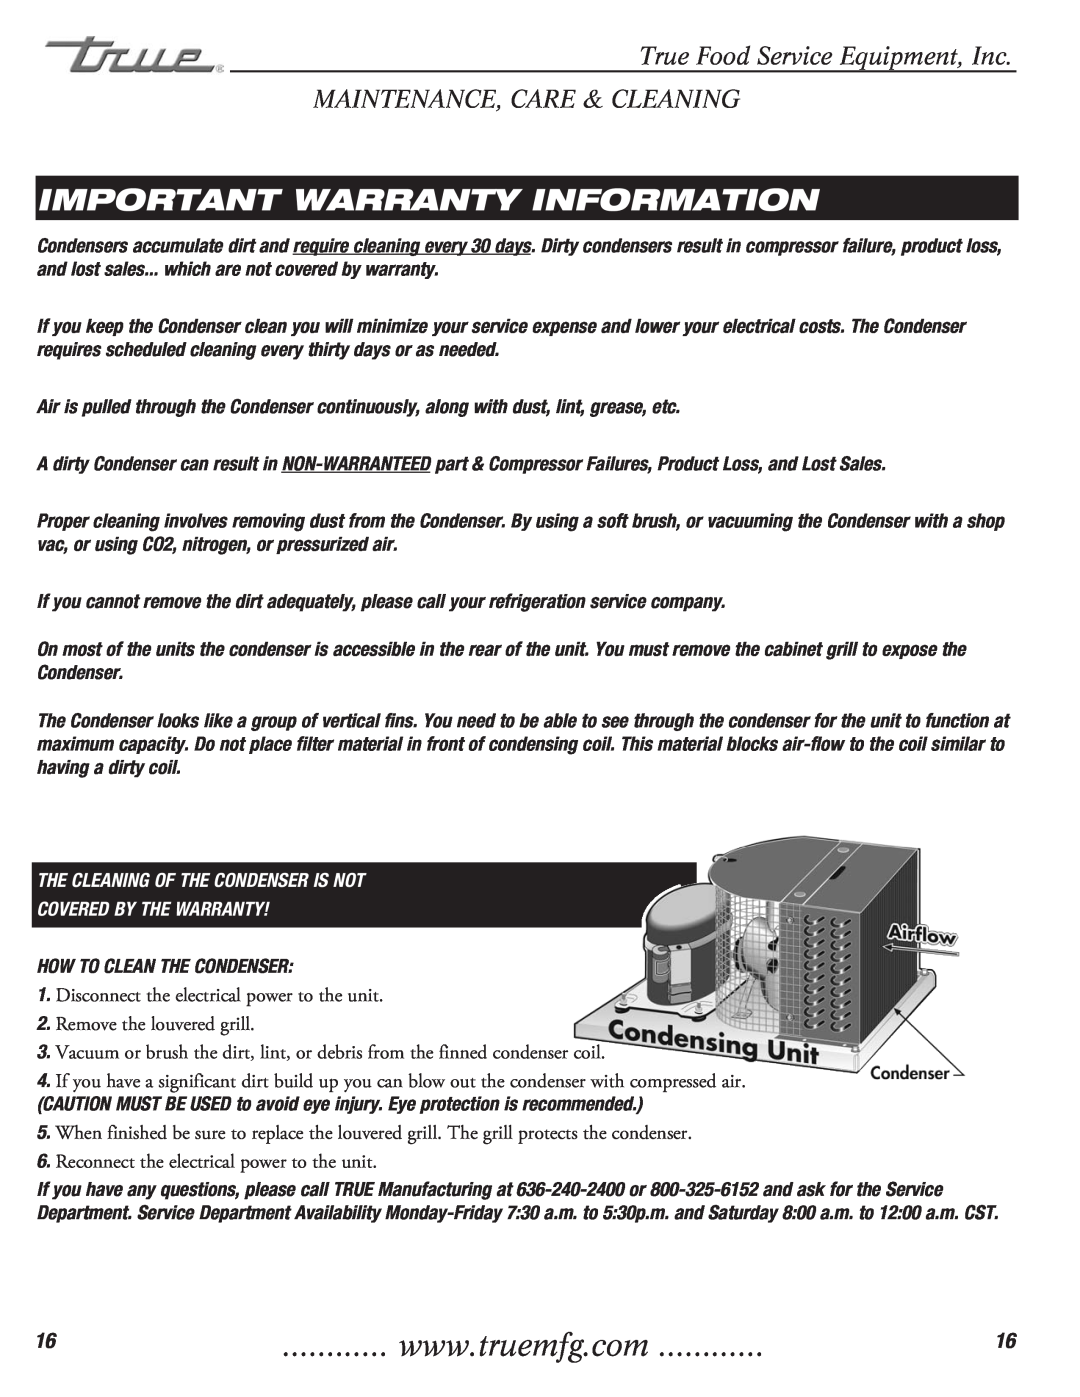 True Manufacturing Company T-23DT installation manual Important Warranty Information, How To Clean The Condenser 